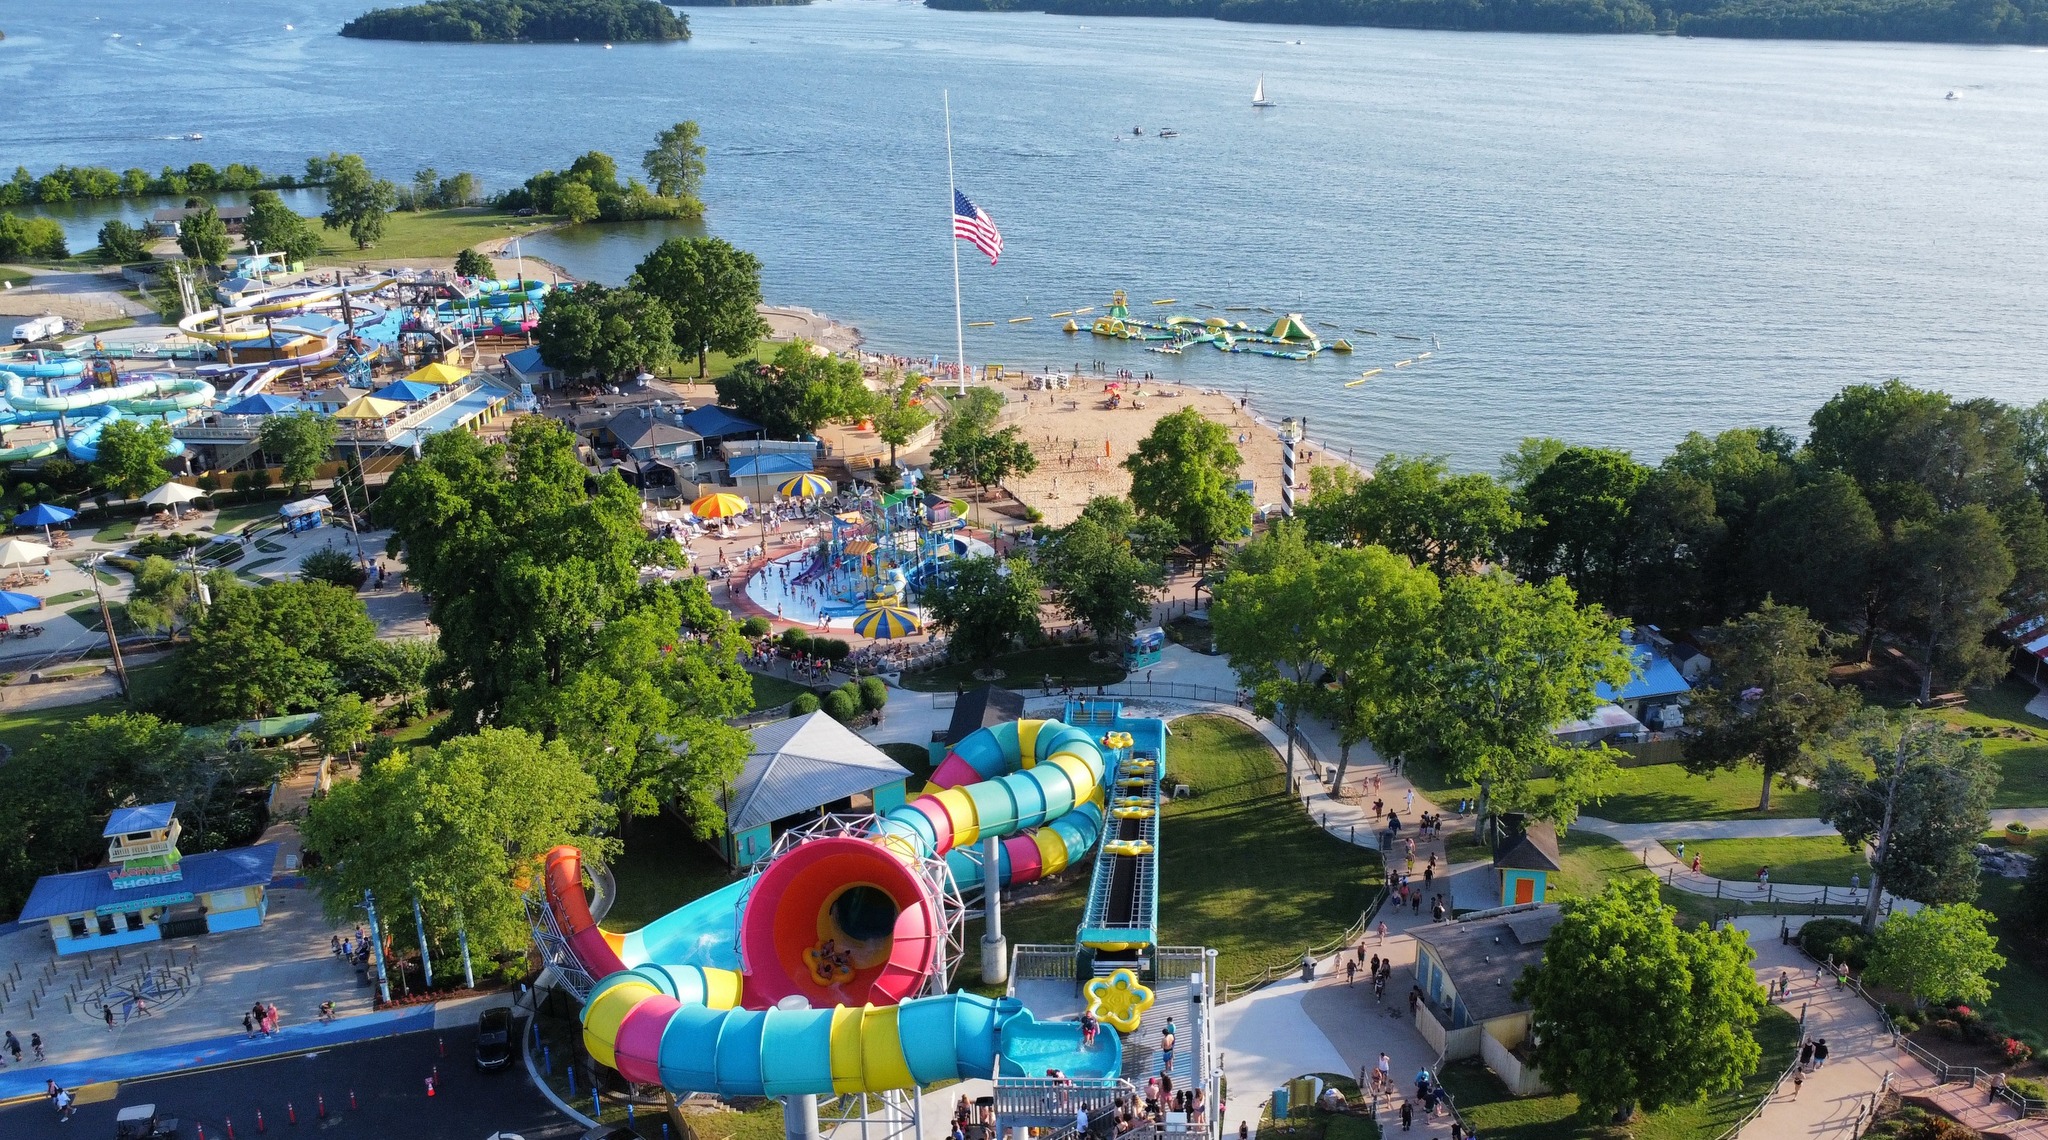 Nashville Shores Lakeside Resort is a water park, adventure course, and campground located in Hermitage, Tennessee, along the shore of Percy Priest Lake, 4001 Bell Road.